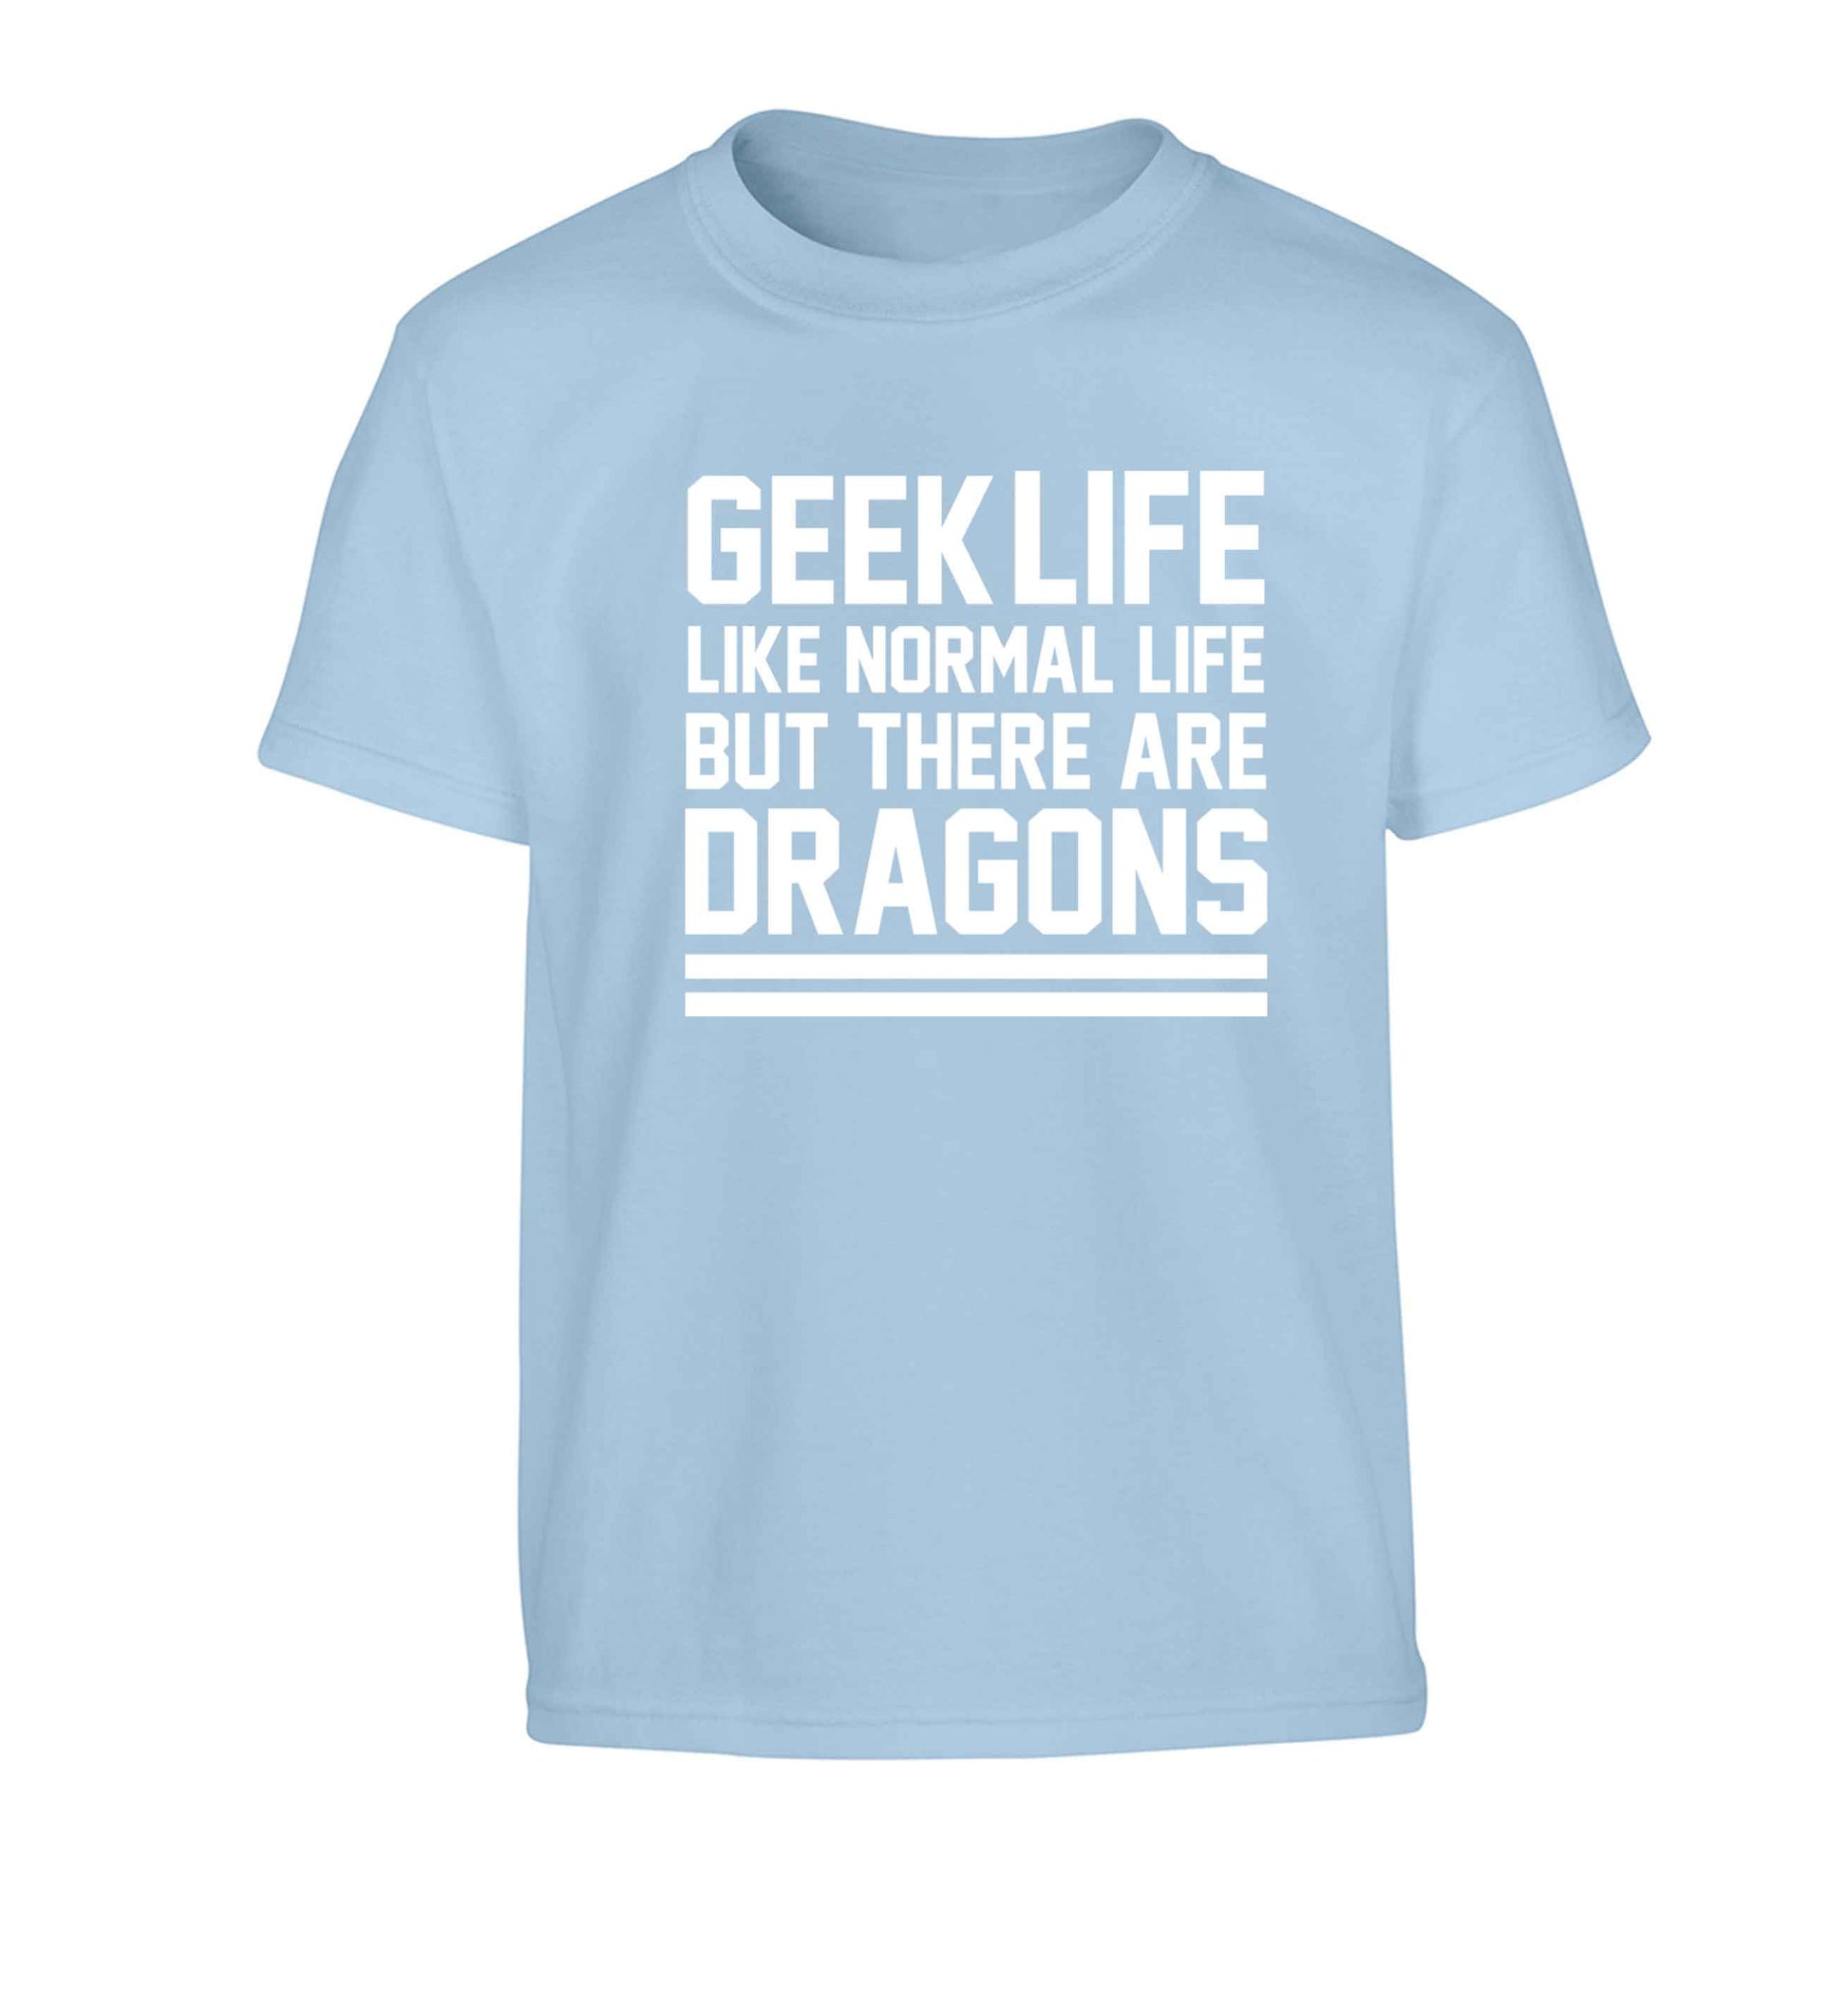 Geek life like normal life but there are dragons Children's light blue Tshirt 12-13 Years